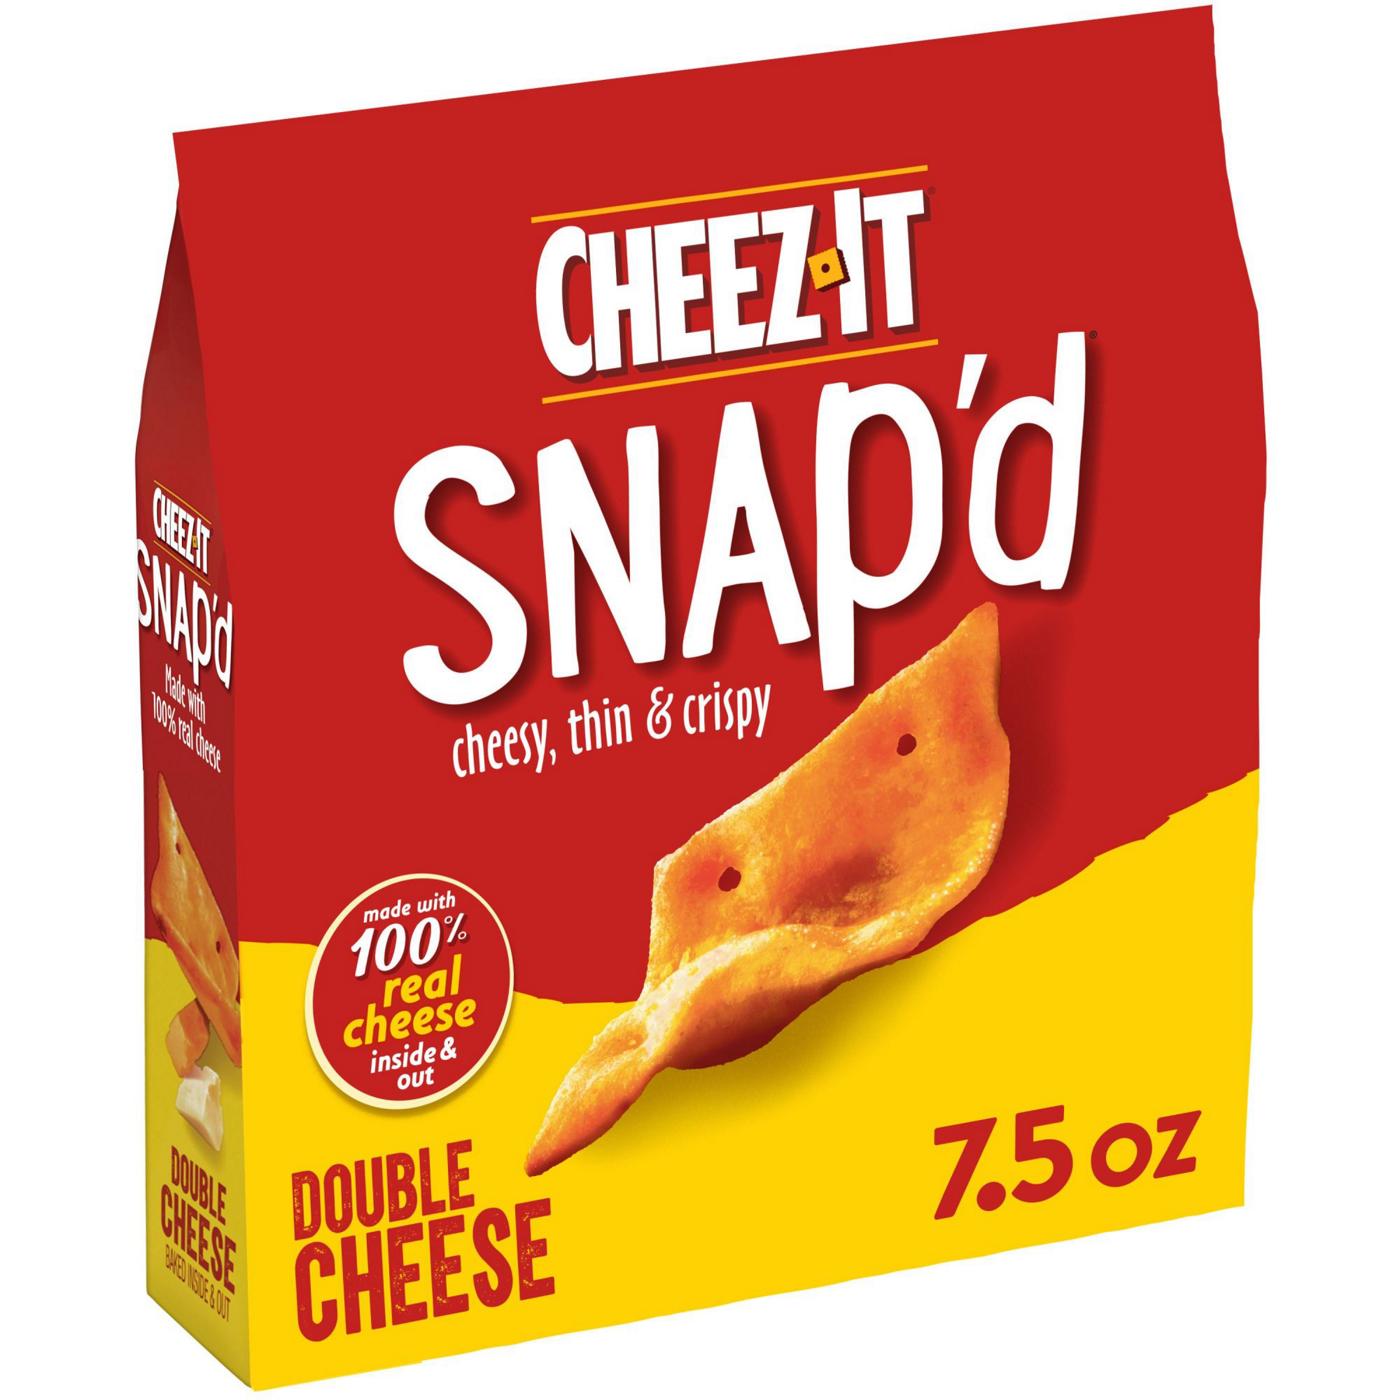 Cheez-It Snap'd Double Cheese Cheese Cracker Chips; image 4 of 5